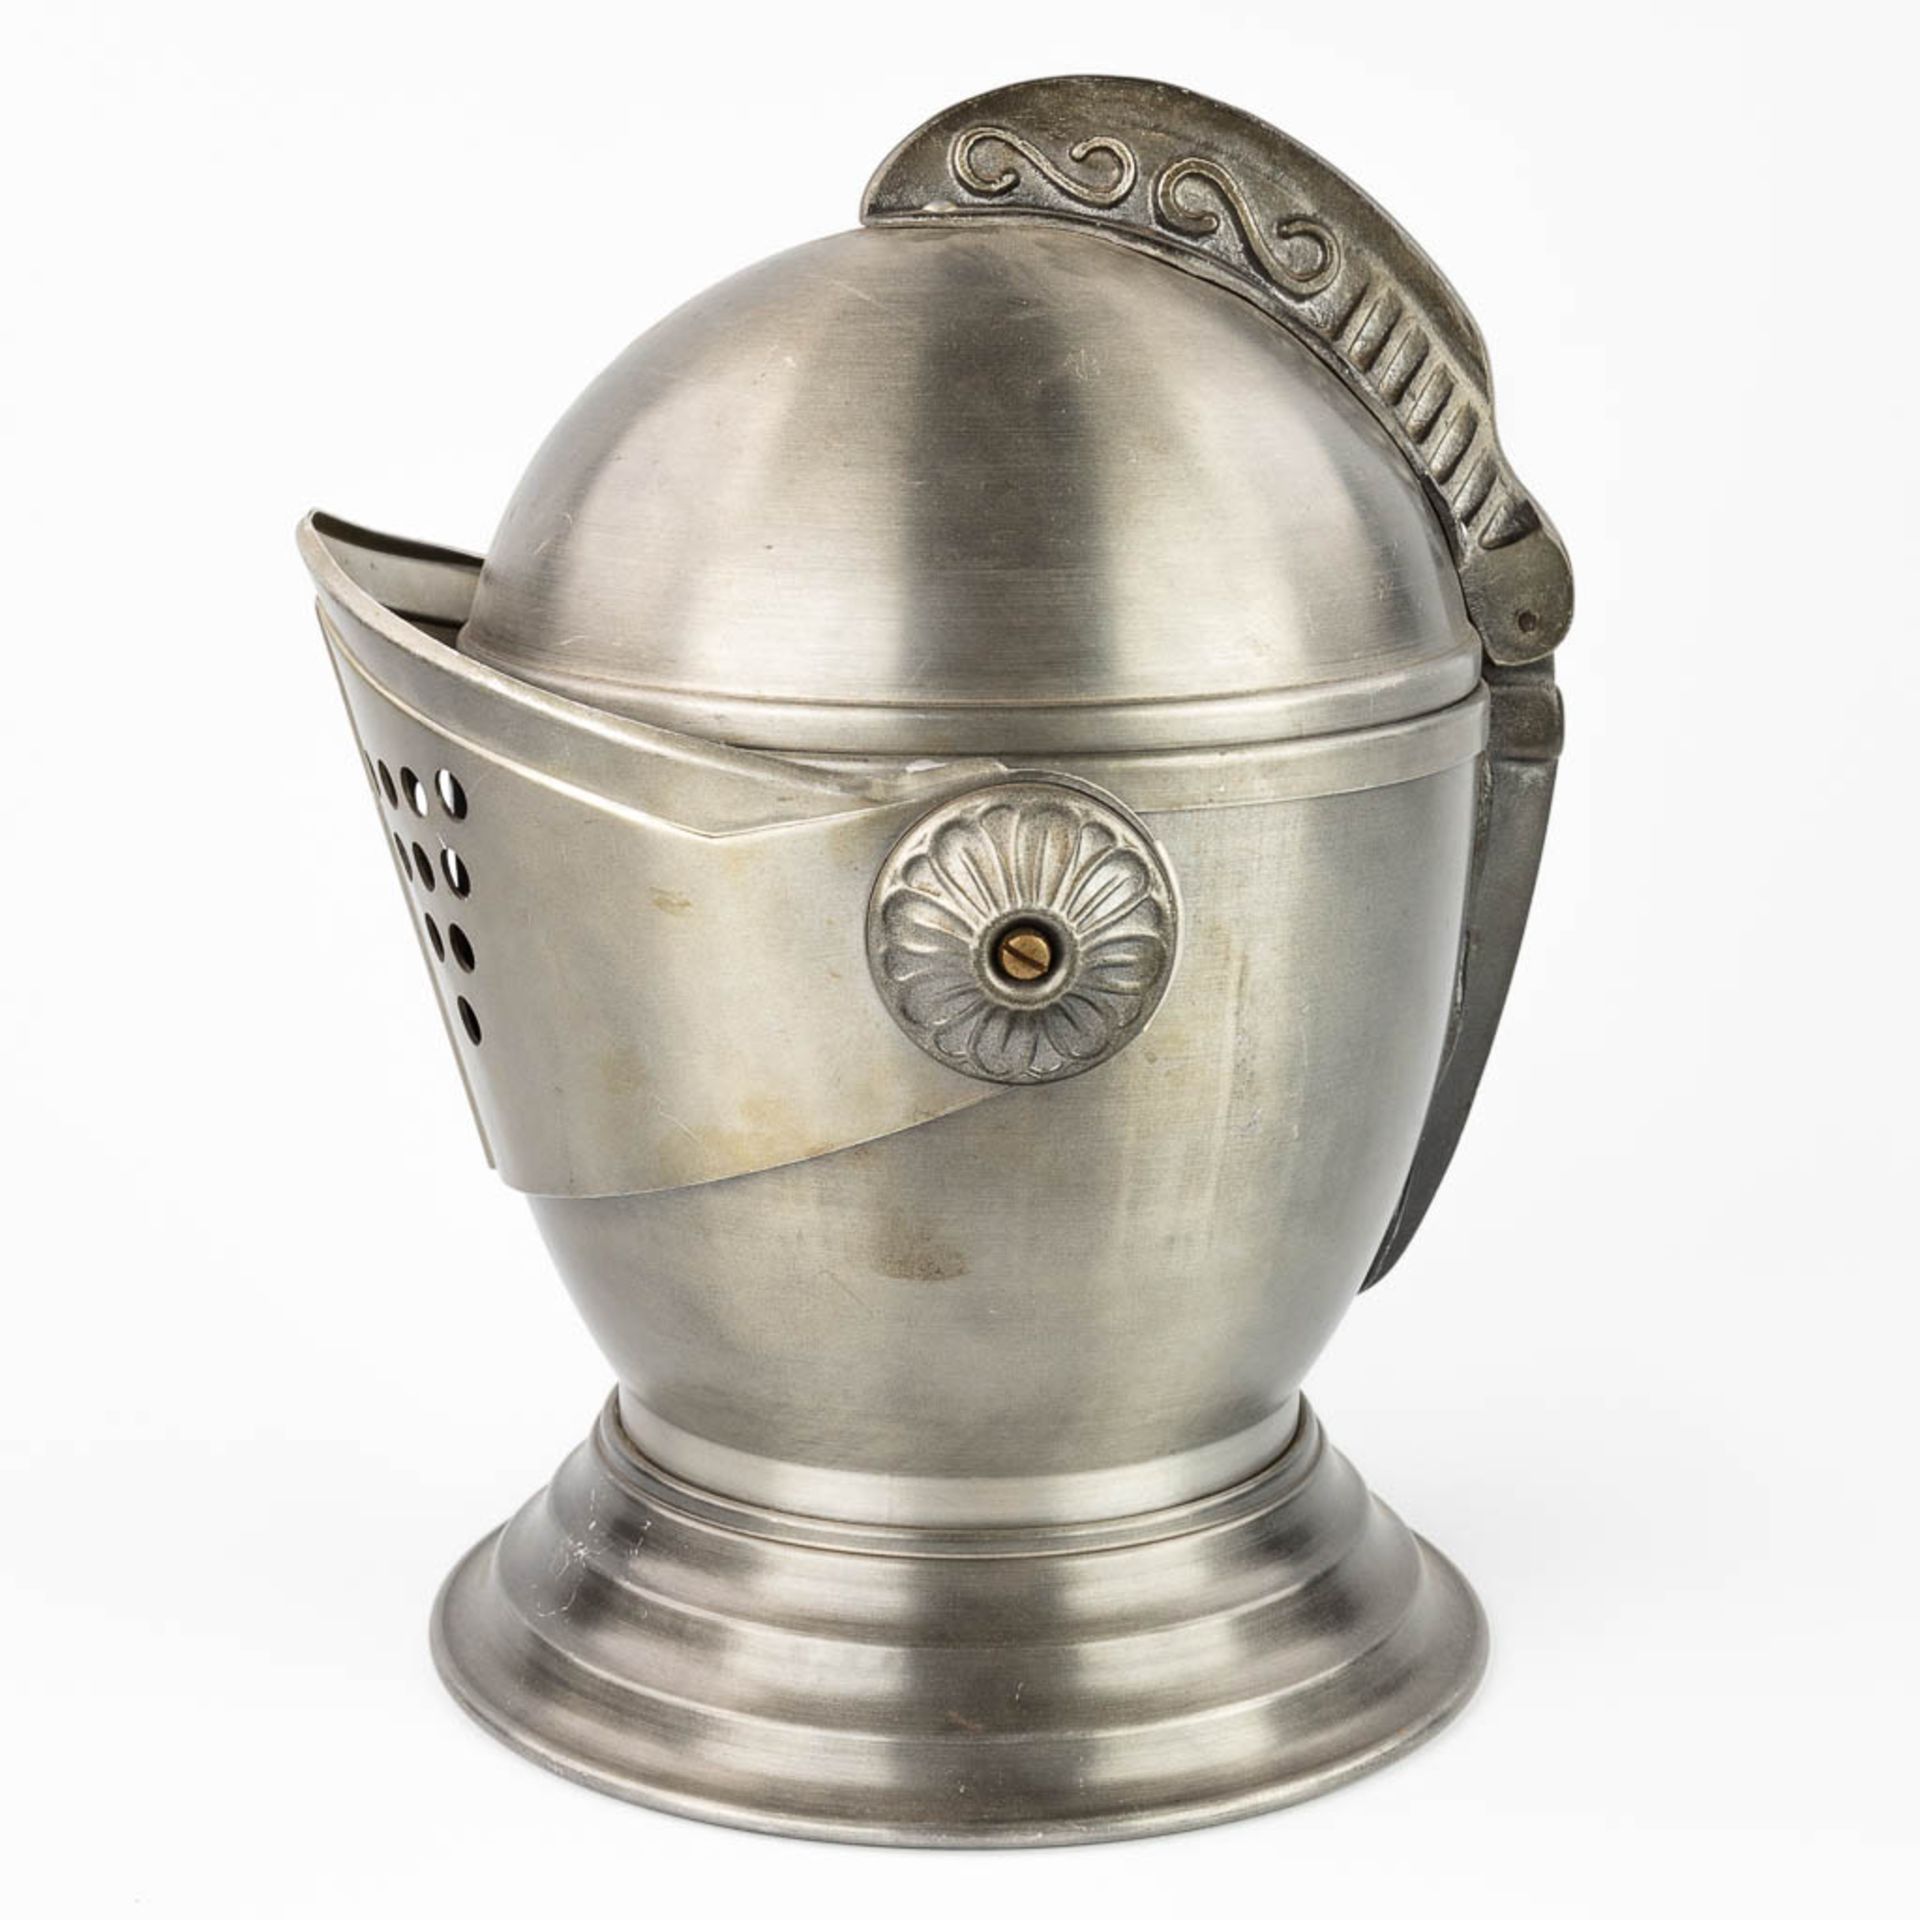 A mid-C. Ice Pail in the shape of a knight's helmet. (29 x 24 x 35cm) - Image 7 of 17